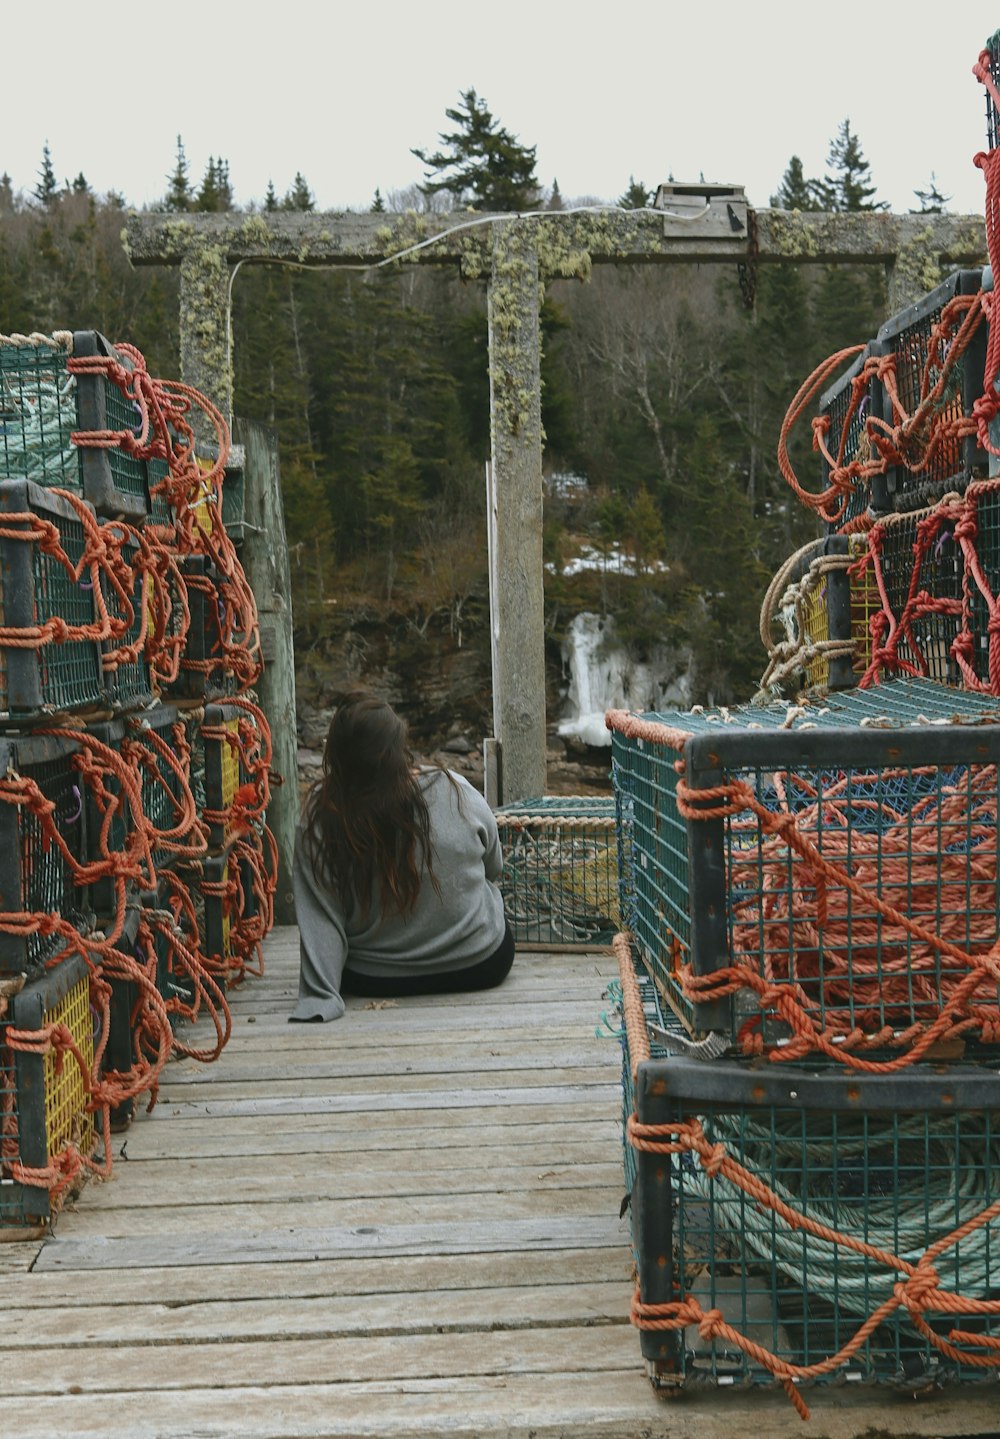 a woman sitting on a dock next to a pile of lobster traps